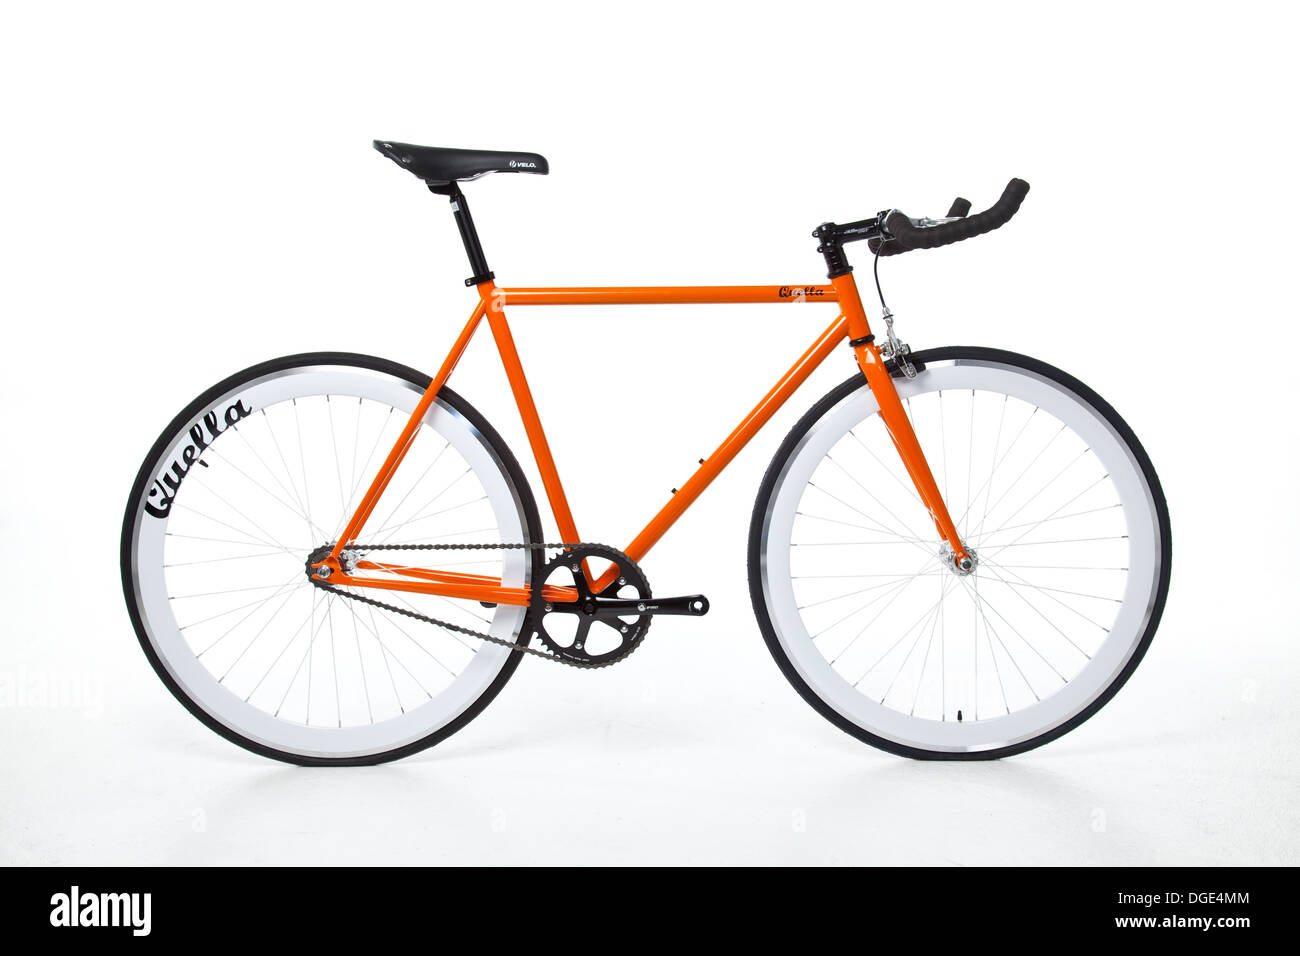 Fixed gear bicycle. Stock Photo